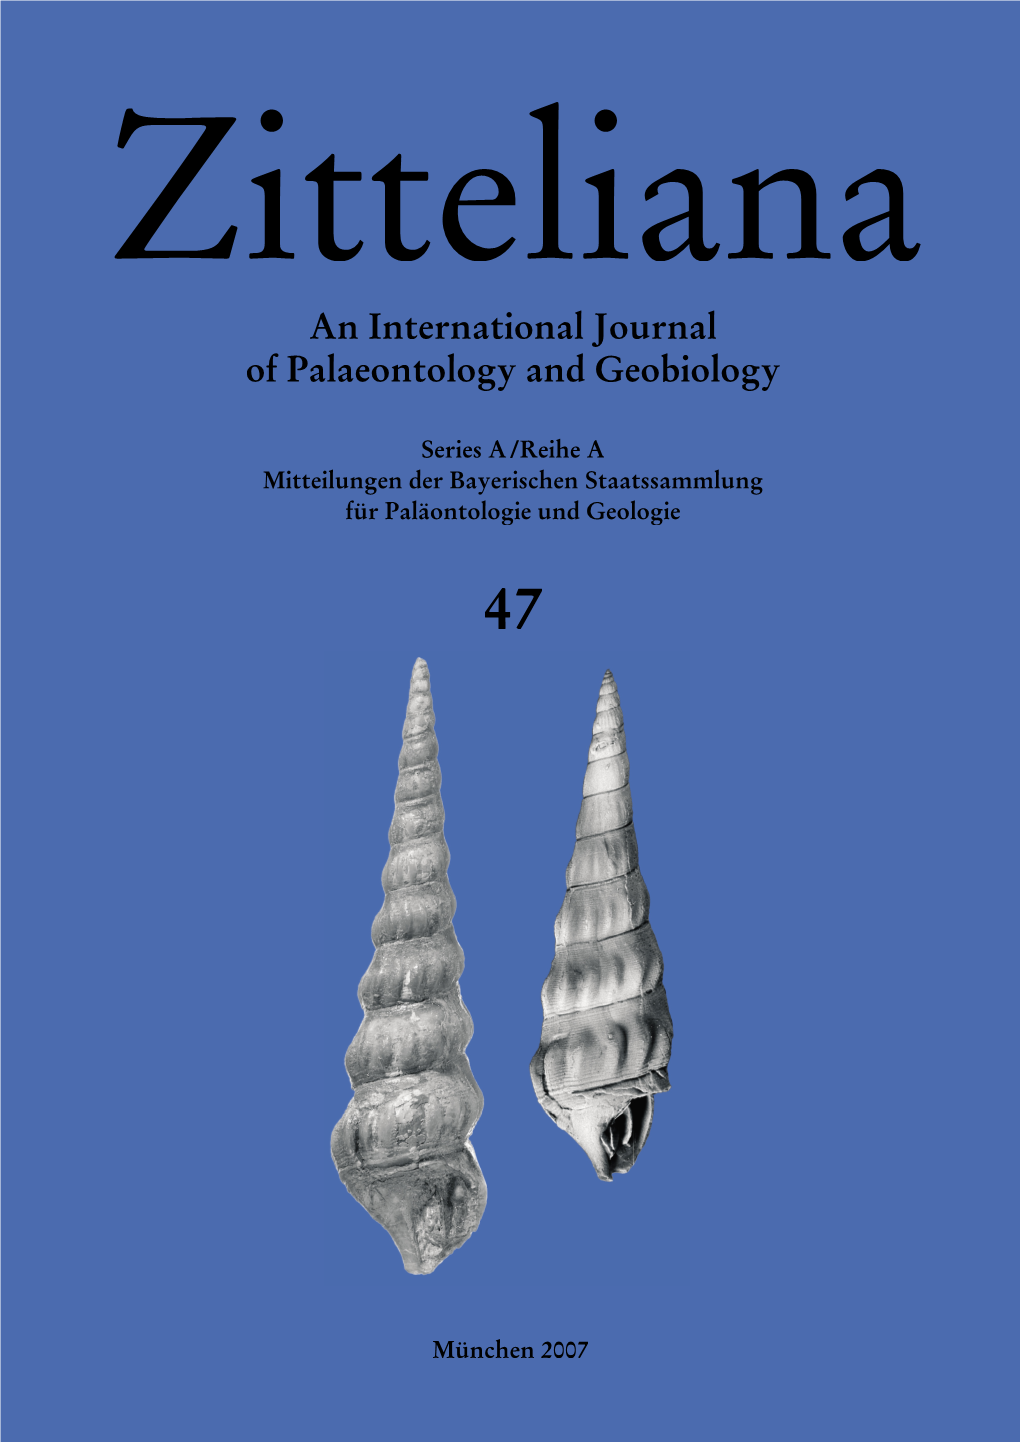 Two New Gastropod Genera from the Early Jurassic (Pliensbachian) of Franconia (South Germany) 59